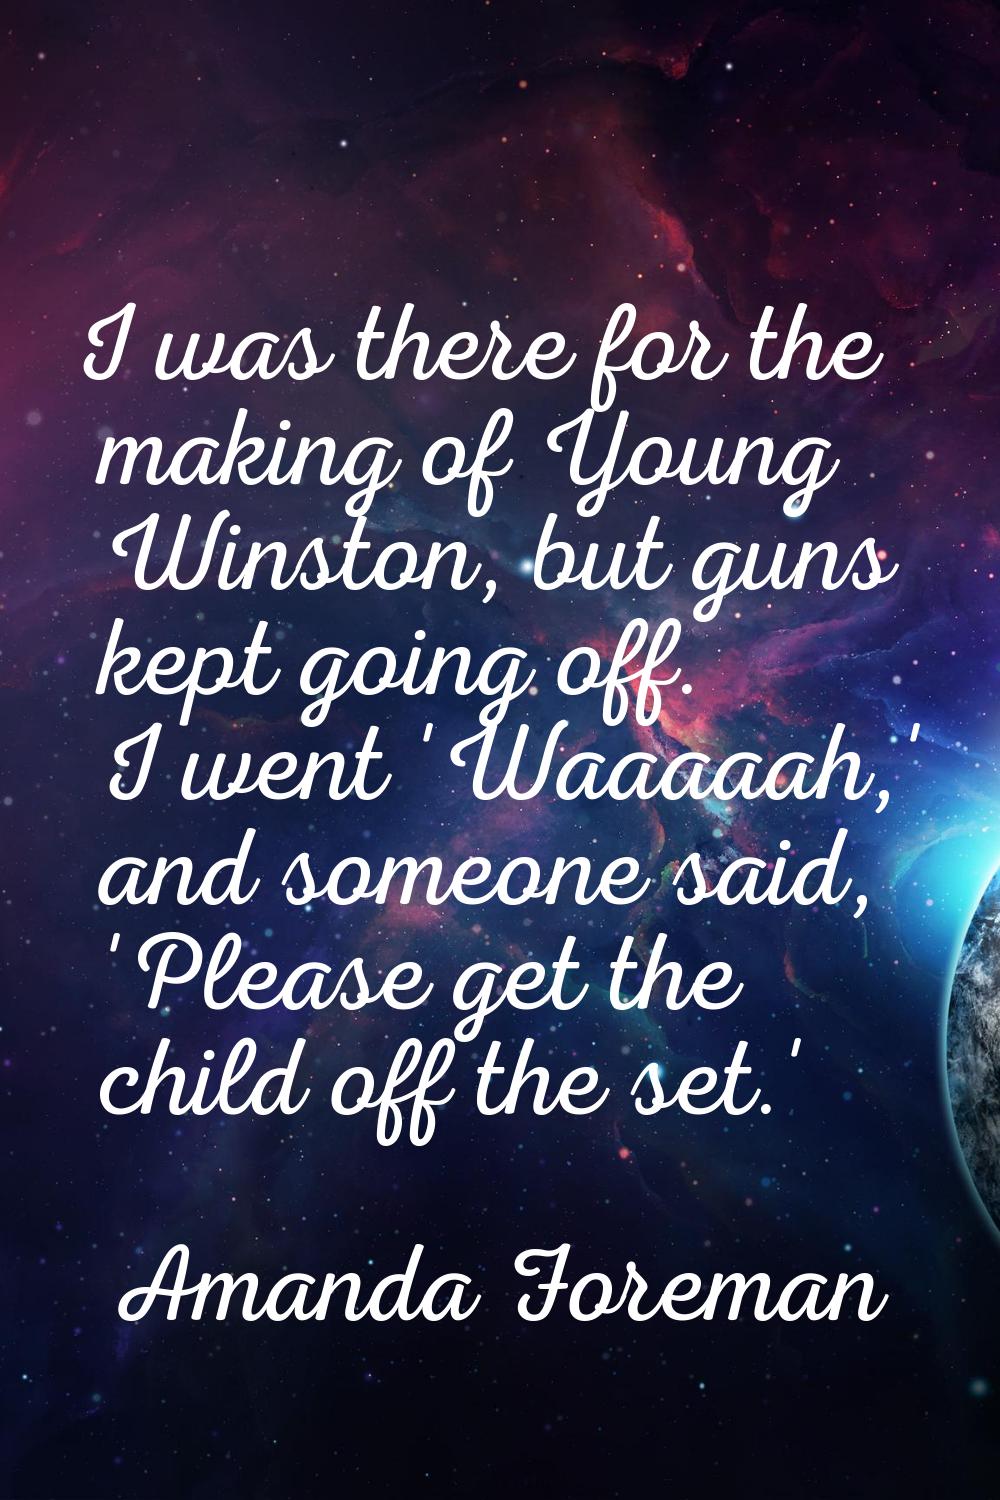 I was there for the making of Young Winston, but guns kept going off. I went 'Waaaaah,' and someone